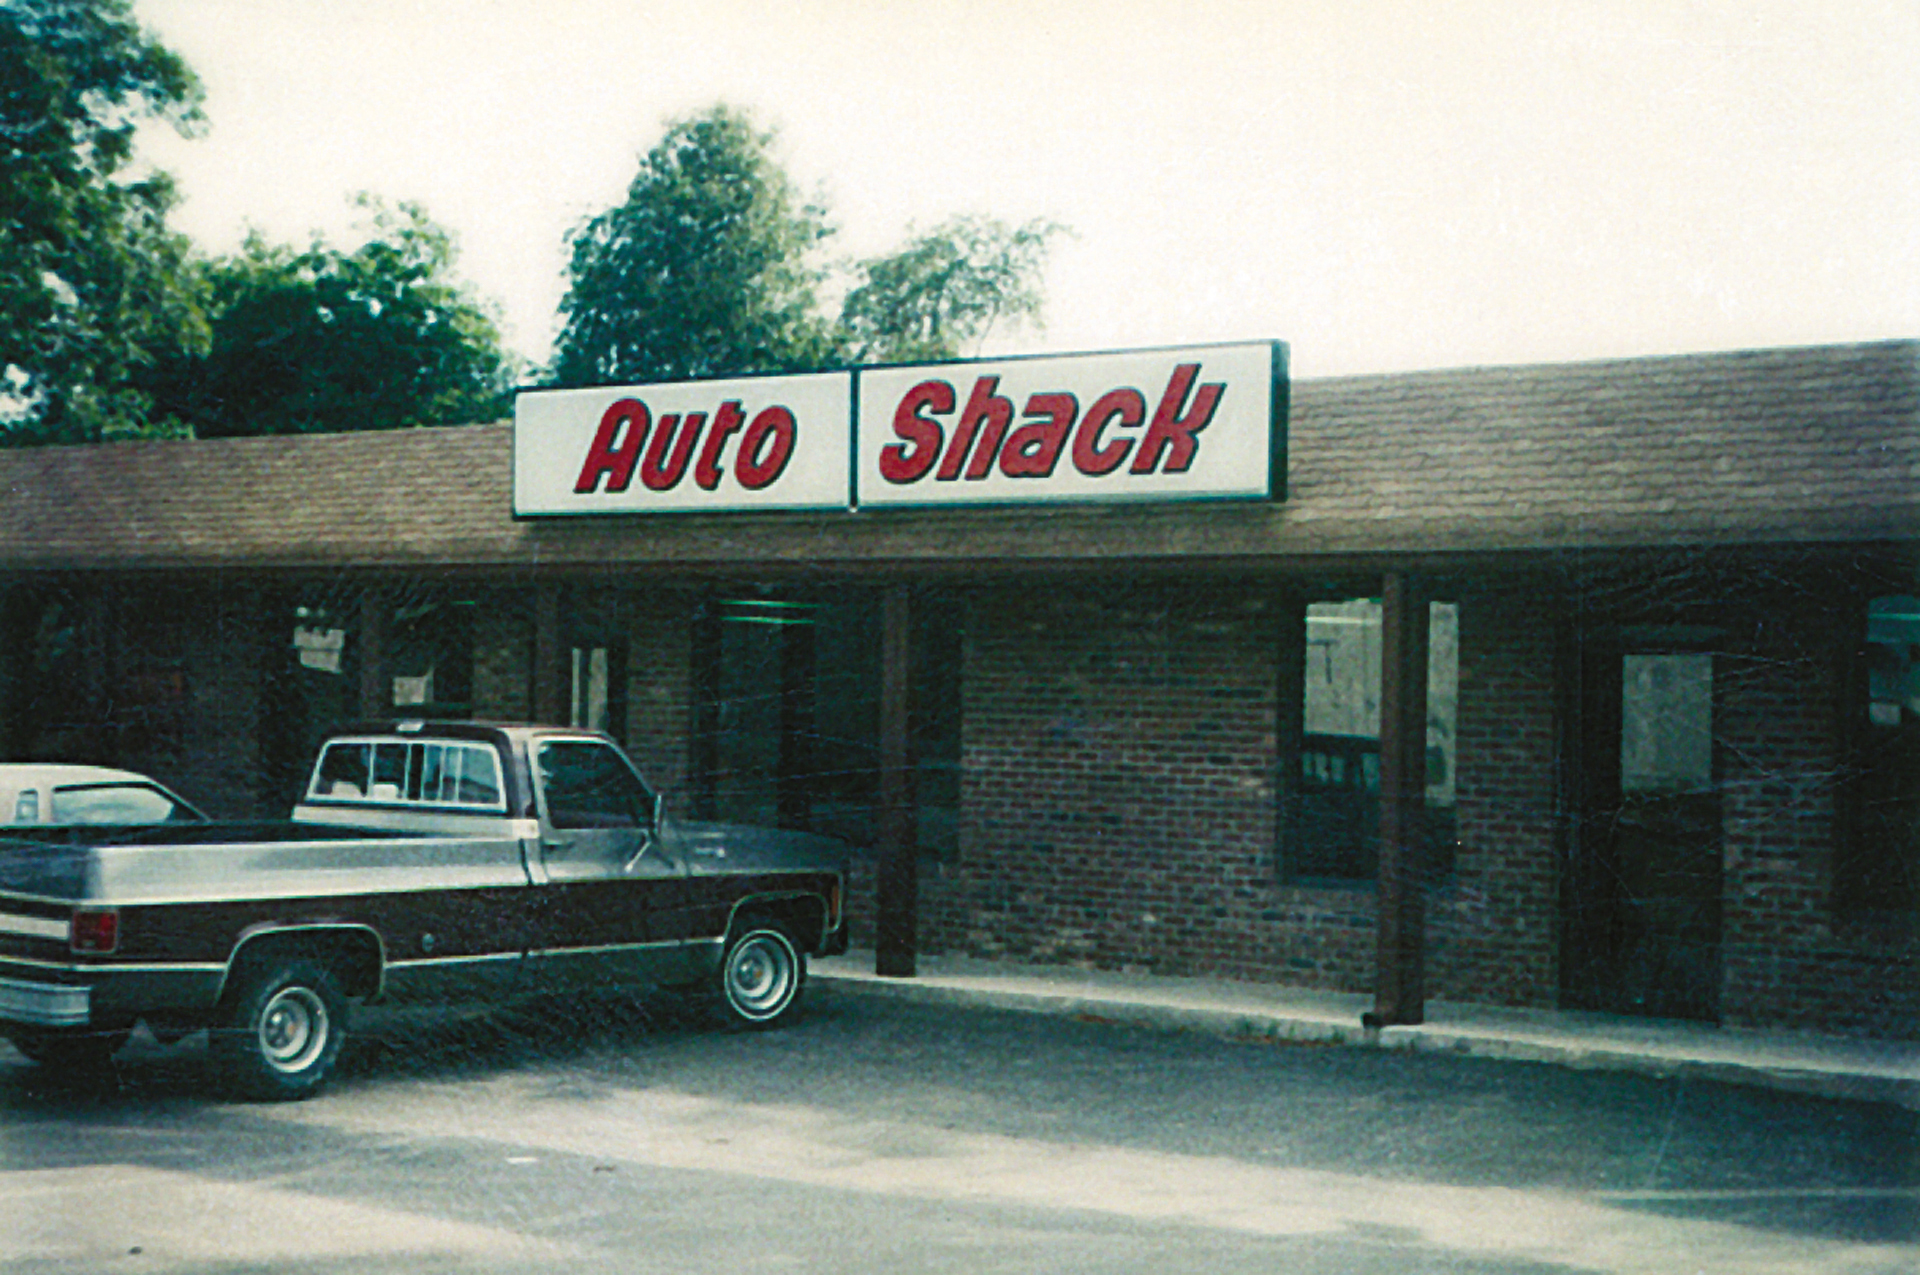 Image of an Auto Shack store